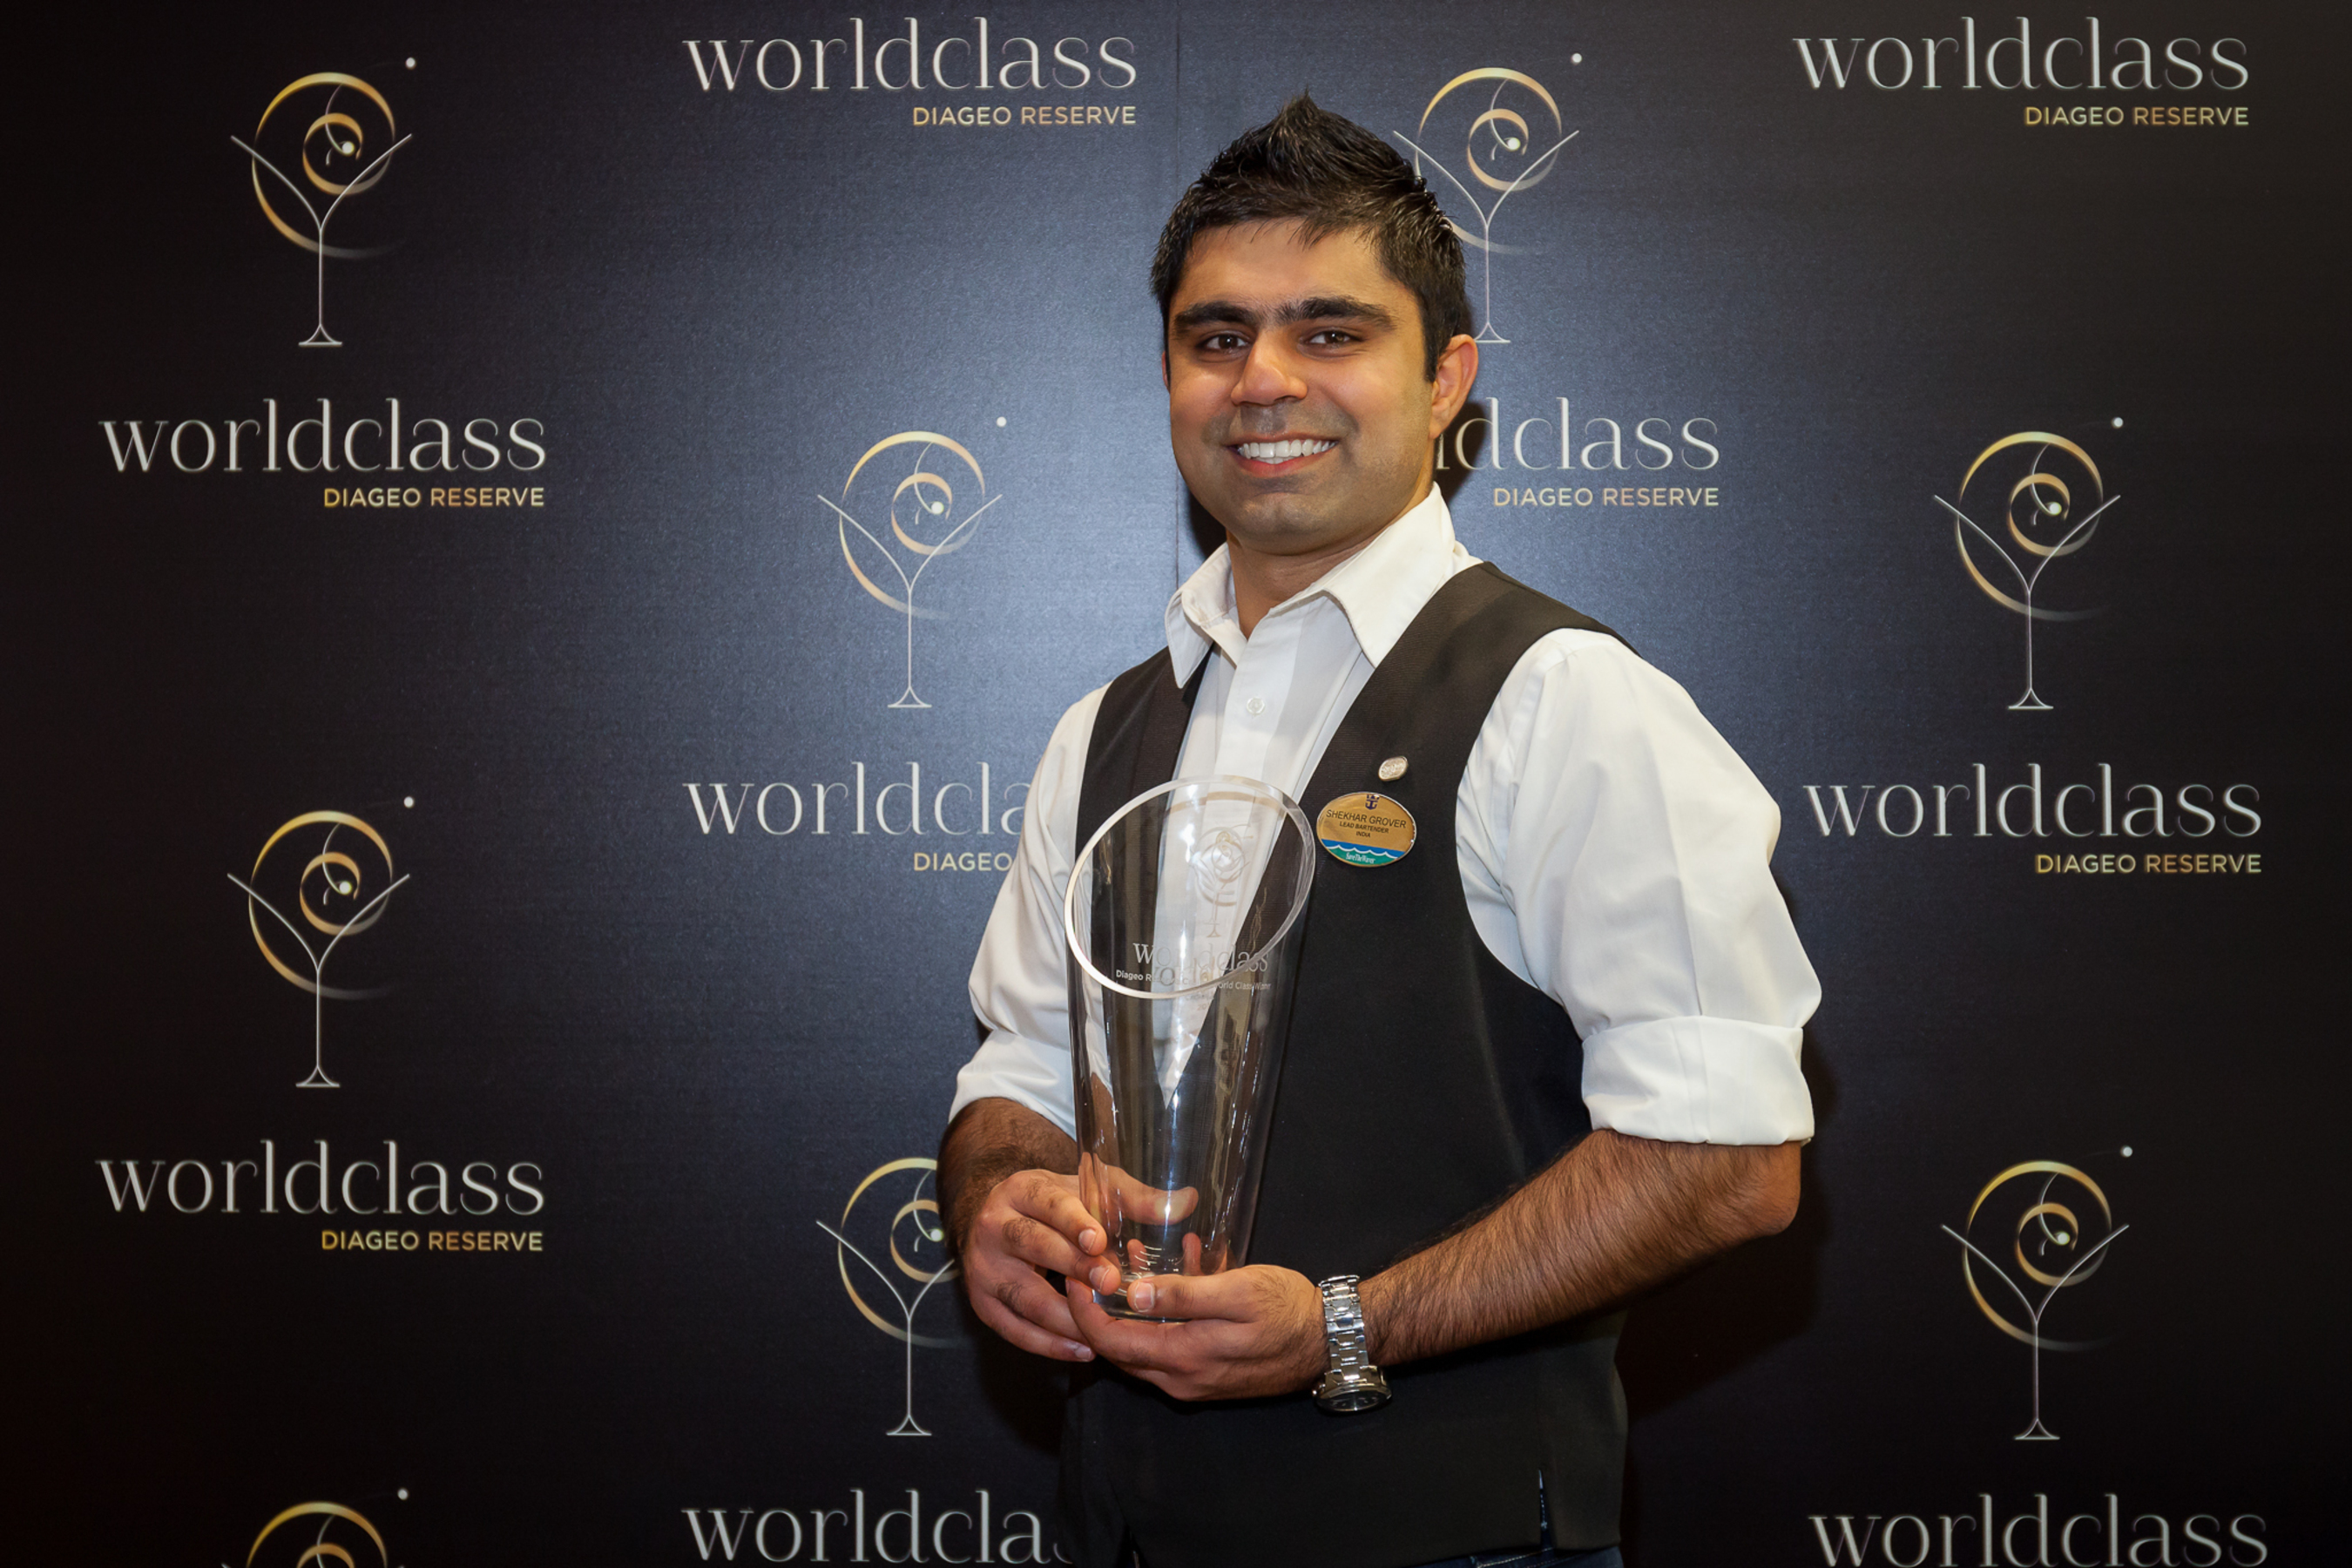 Shekhar Grover of Royal Caribbean International has been crowned Diageo Global Travel best cruise line bartender at a glamorous DIAGEO RESERVE WORLD CLASS final (PRNewsFoto/Diageo Global Travel)